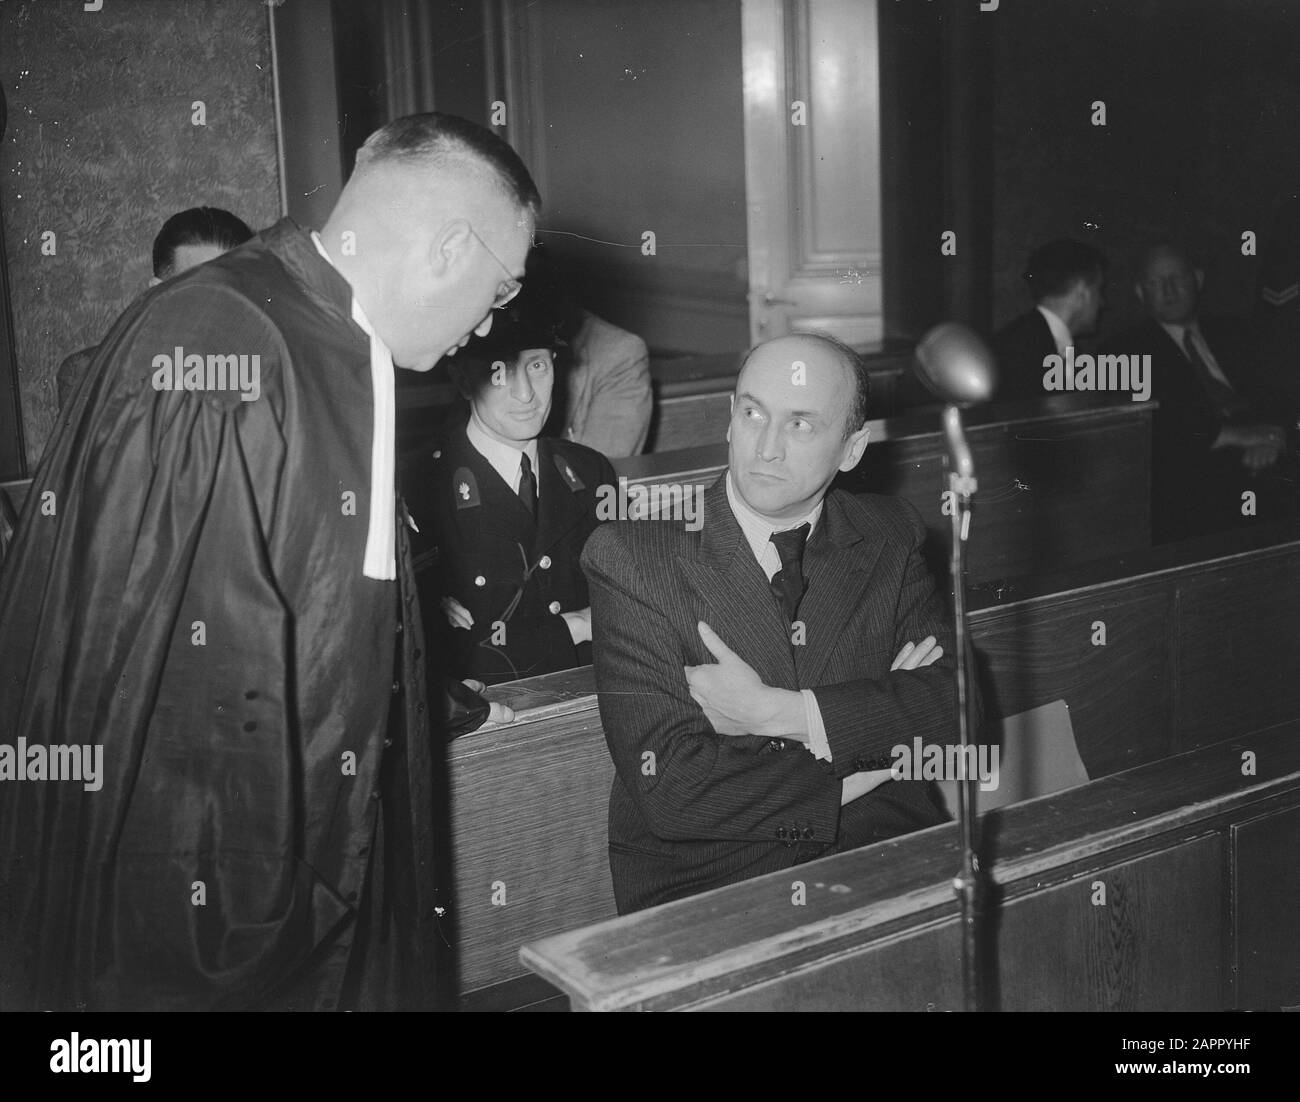 Willy Lages, former chief of the Amsterdam Sicherheitsdienst, during a session of the Special Court in Amsterdam. Left are lawyer mr. O.G. Veenstra Date: 19 July 1949 Location: Amsterdam, Noord-Holland Keywords: war criminals, lawsuits, Second World War Personal name: Lages Willy, Veenstra O G Stock Photo